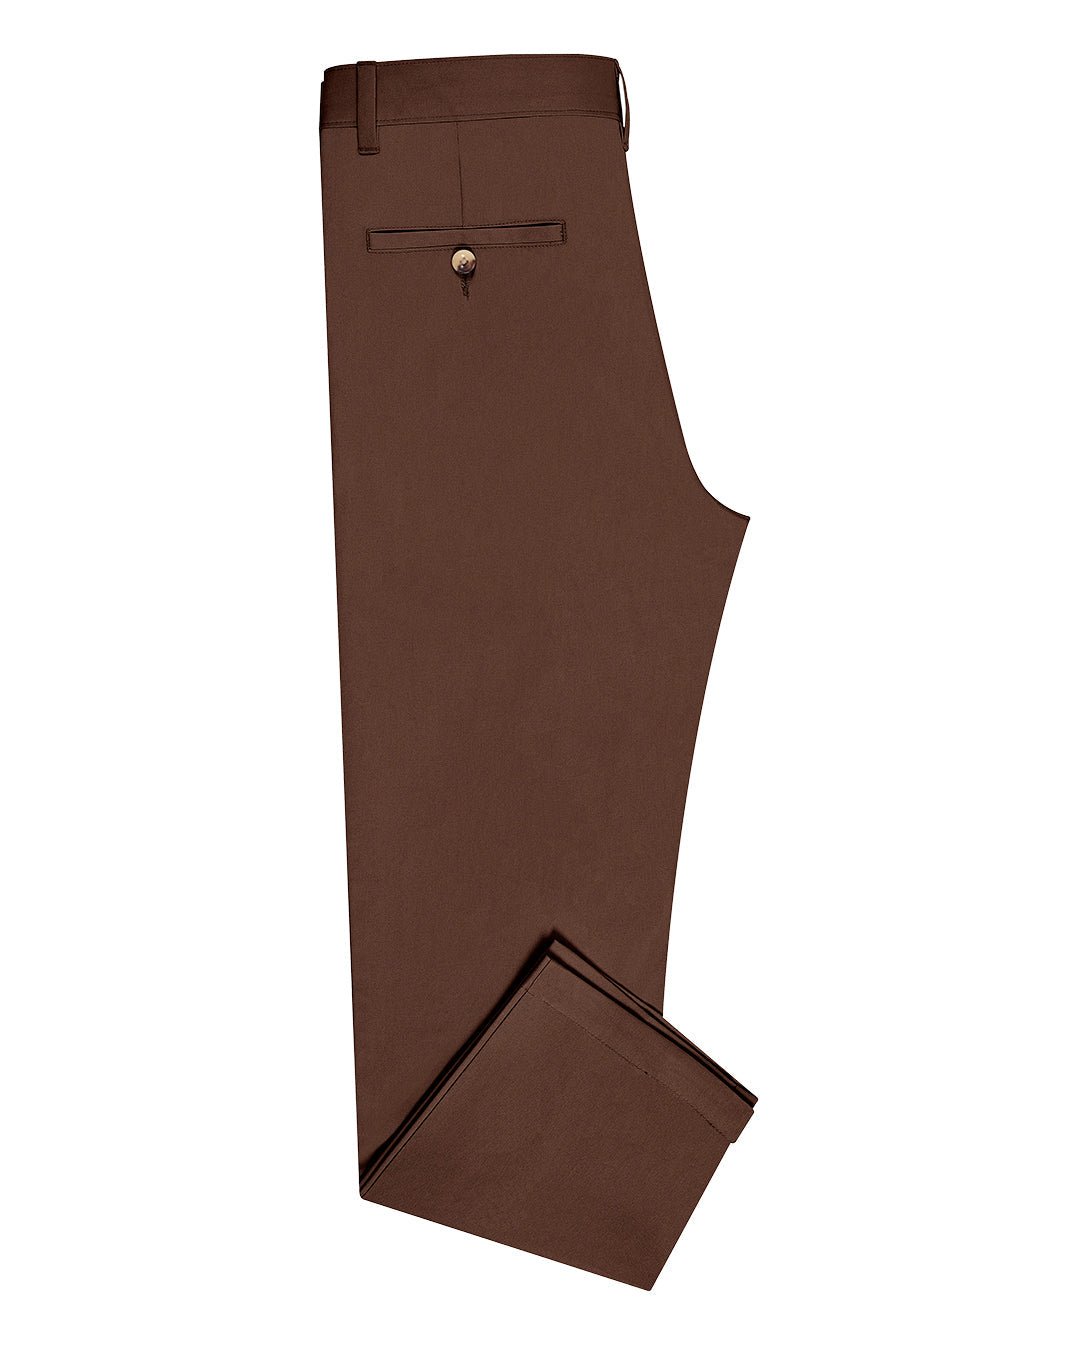 Side view of custom Genoa Chino pants for men by Luxire in chestnut brown